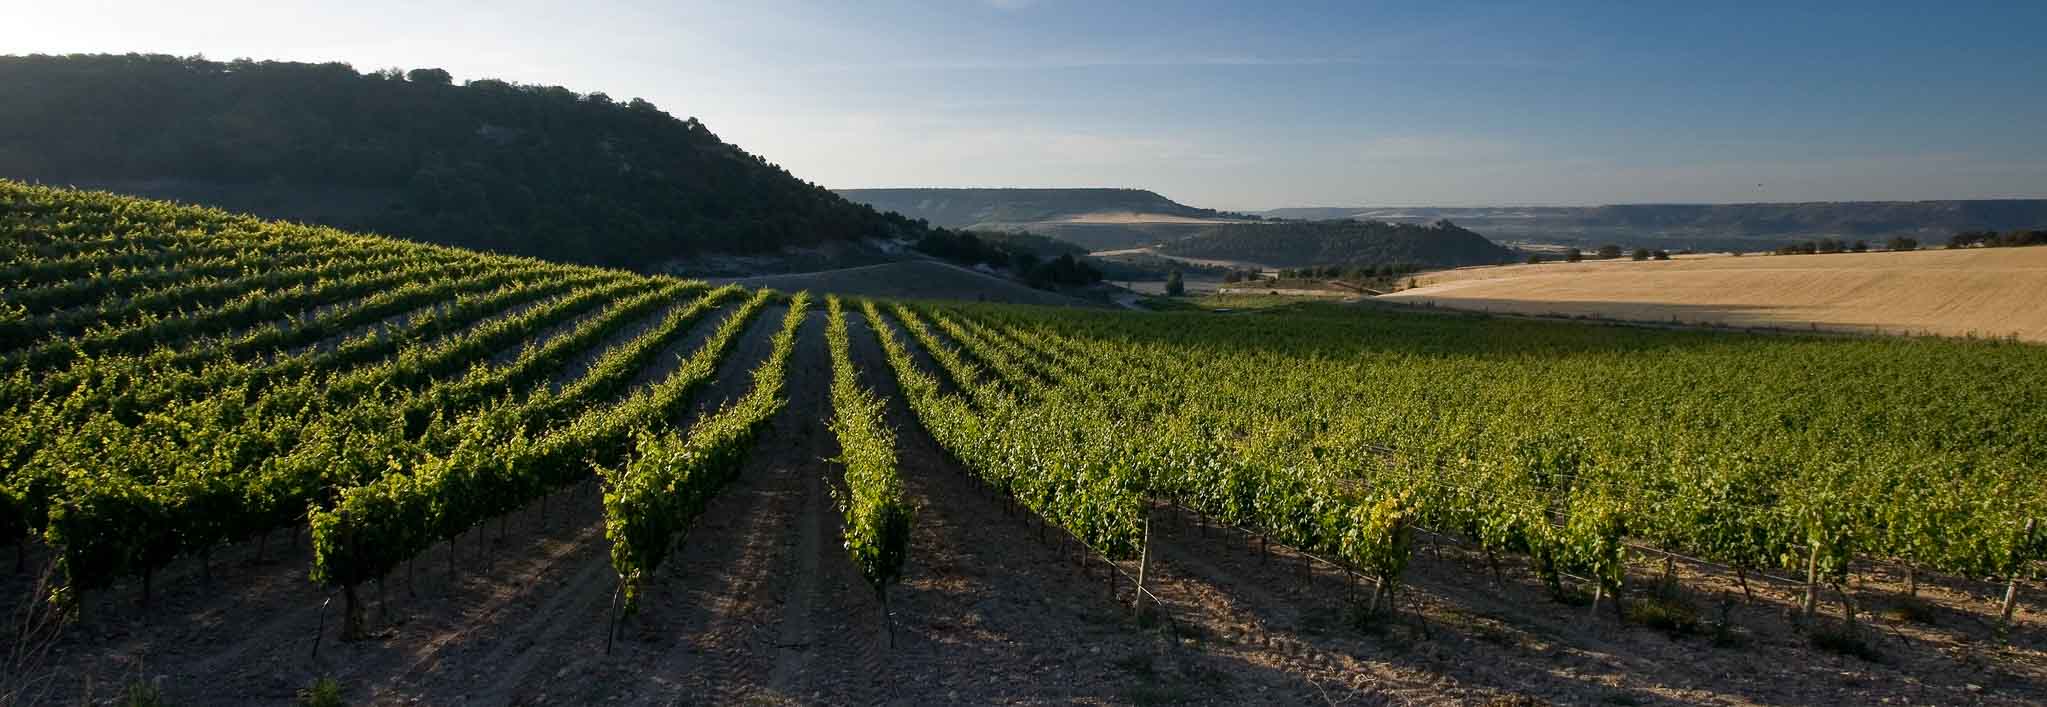 the vineyards at ribera del duero spain one of the day trips in madrid